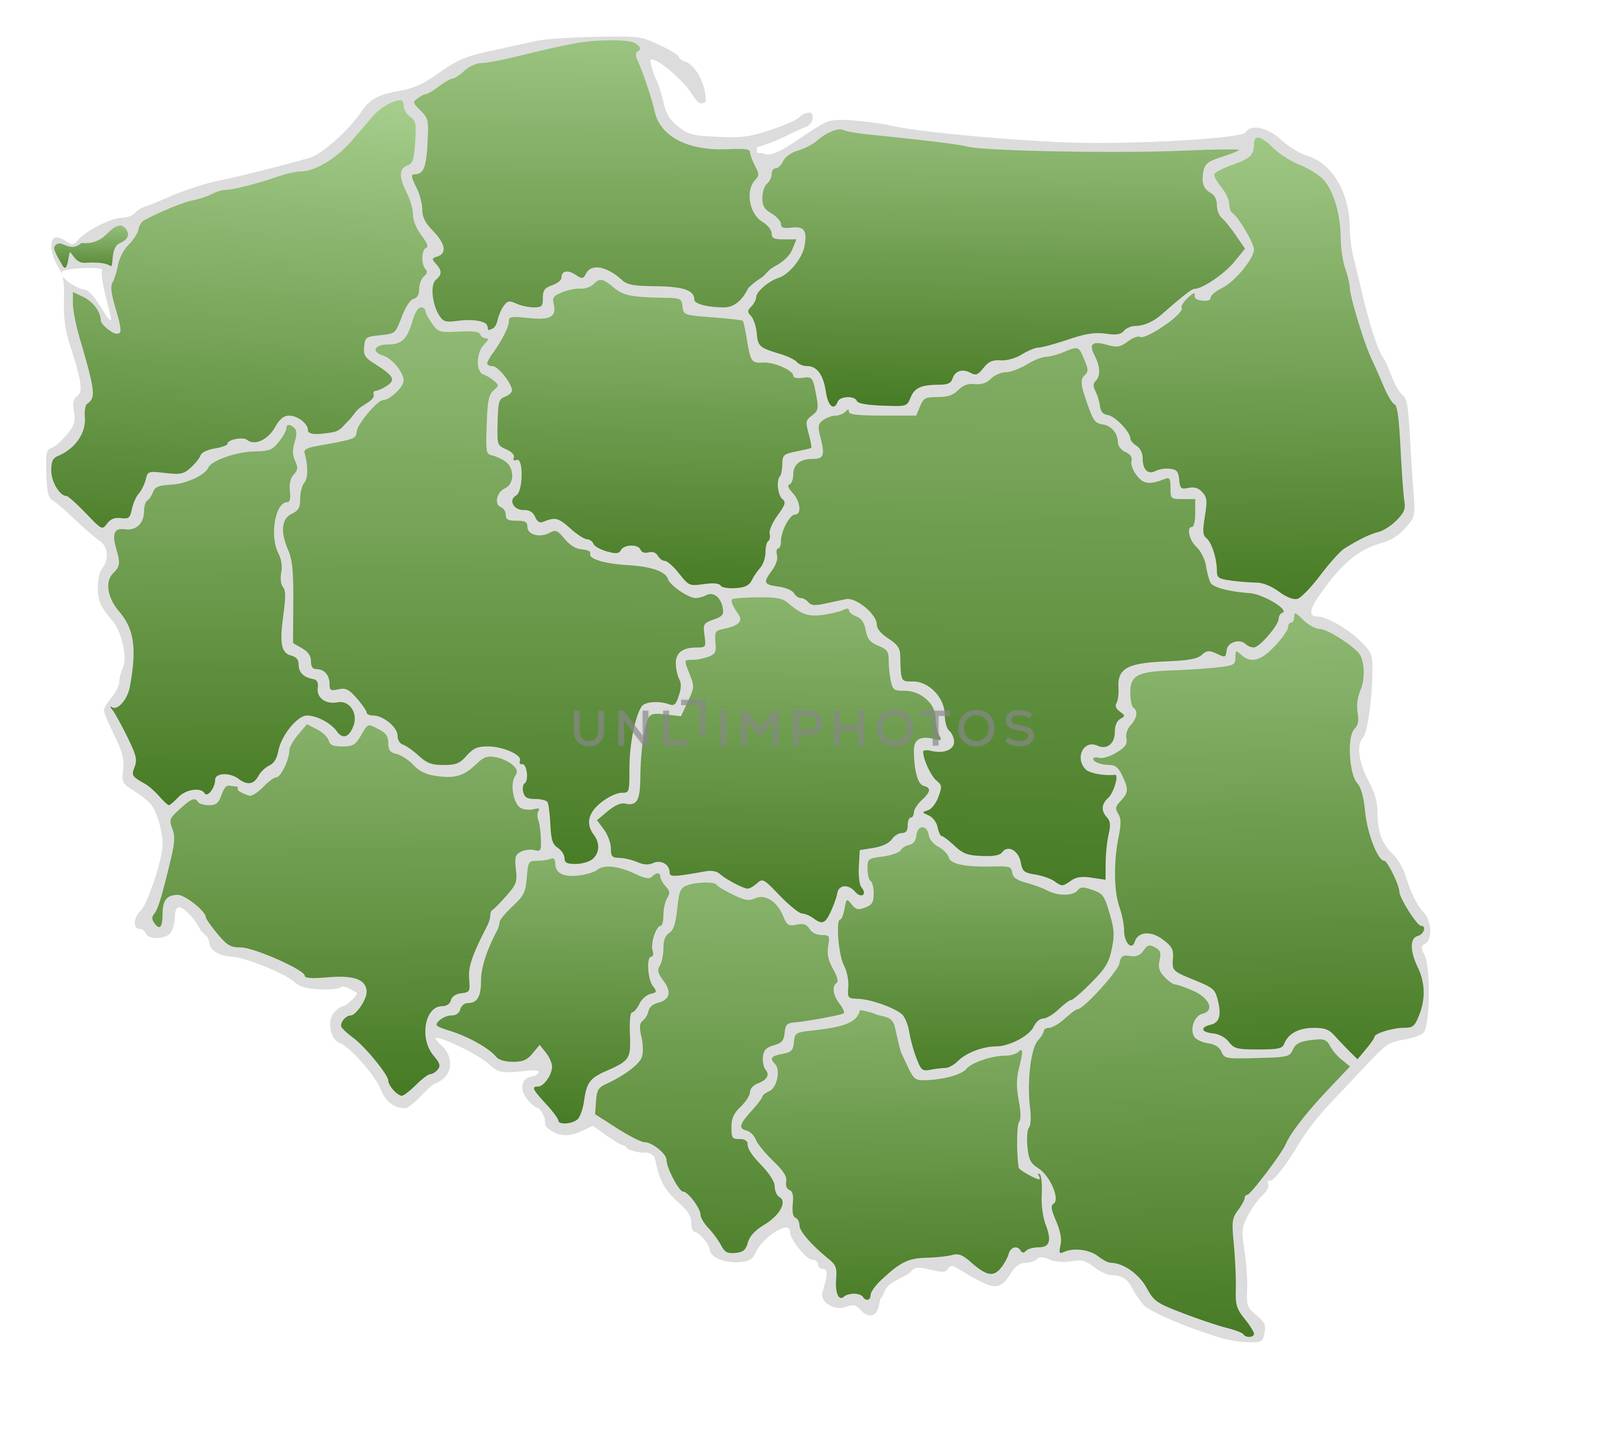 Map of Poland in a green color isolated on a white background with 16 voivodeships